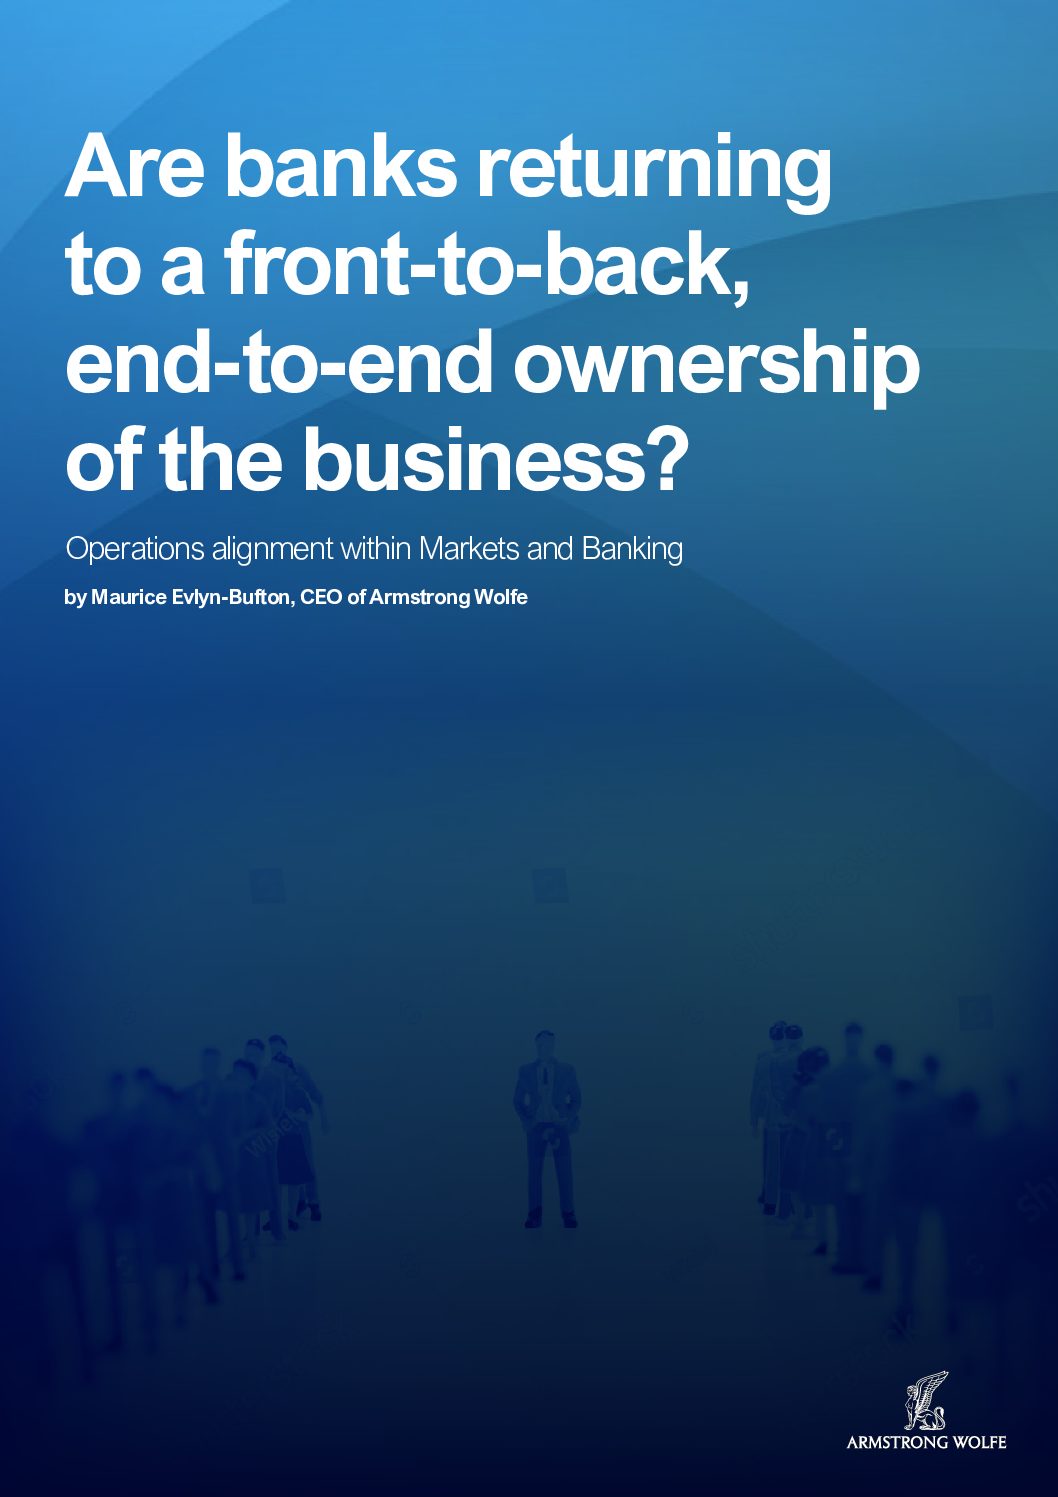 Are Banks Returning to a Front-to-Back, End-to-End Business Ownership?